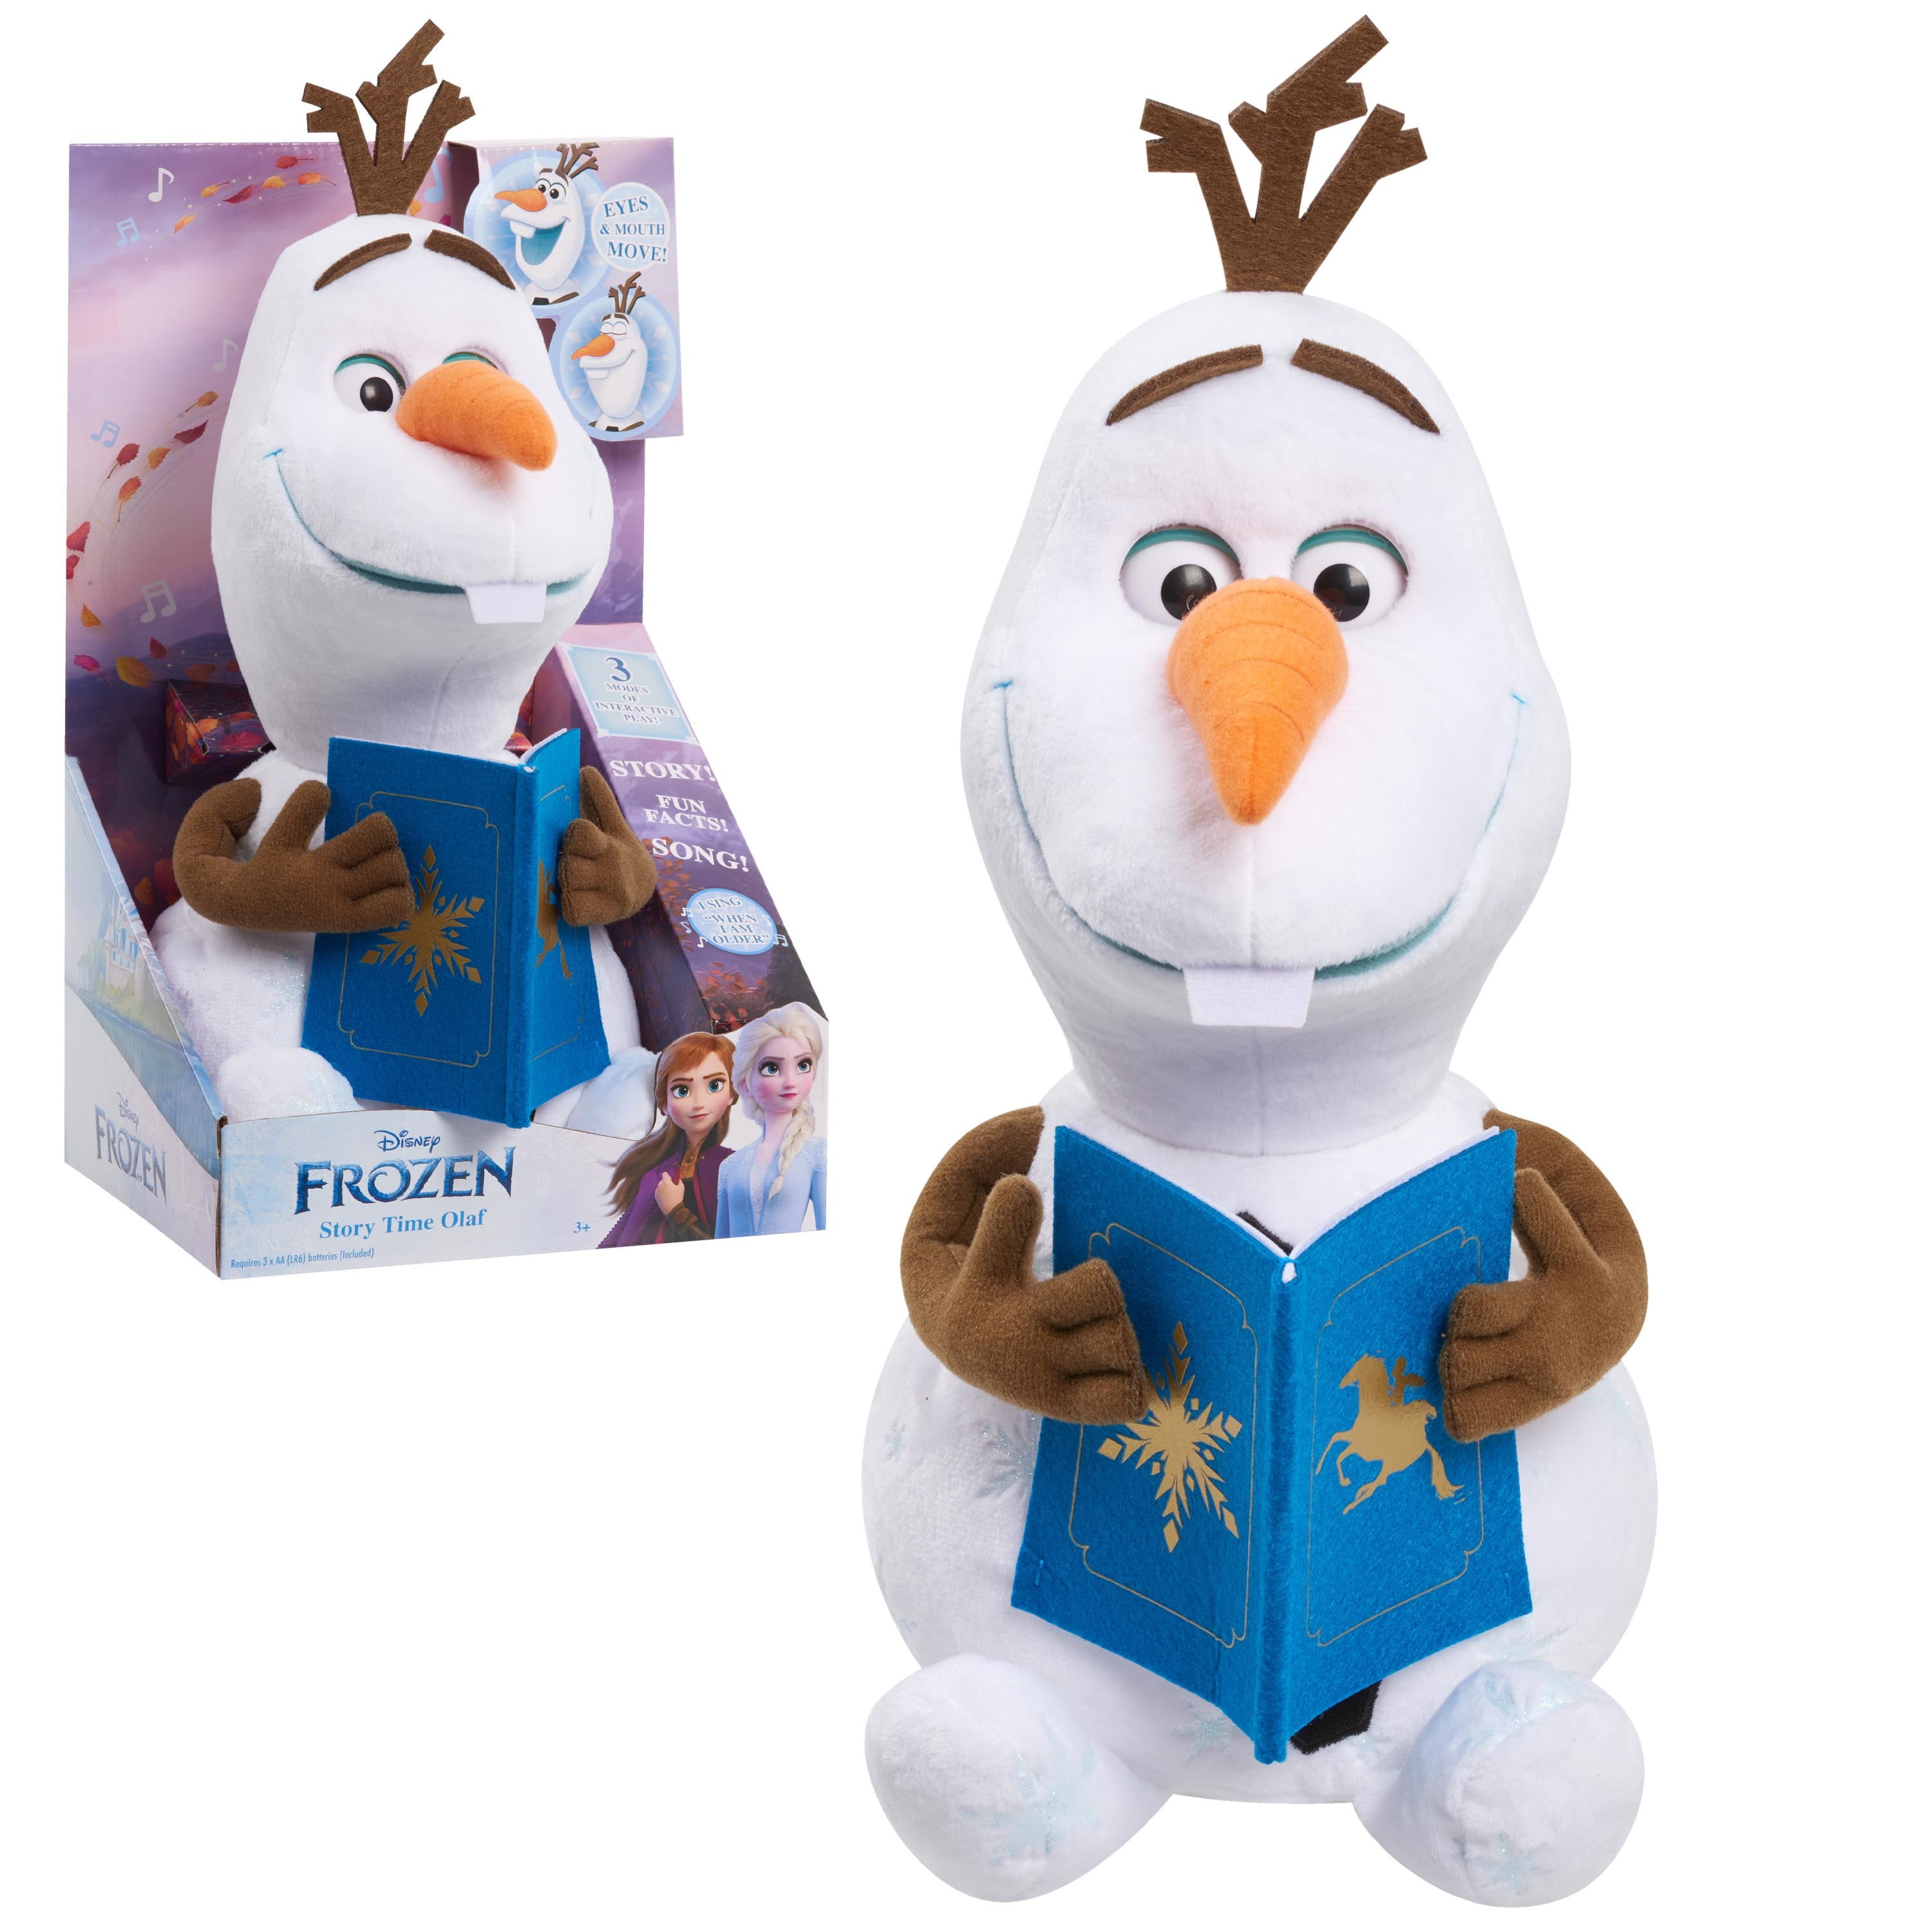 12 Inch Talking and Singing Interactive Feature Plush Toy with 3 Modes of Play Disney Frozen Story Time Olaf by Just Play 